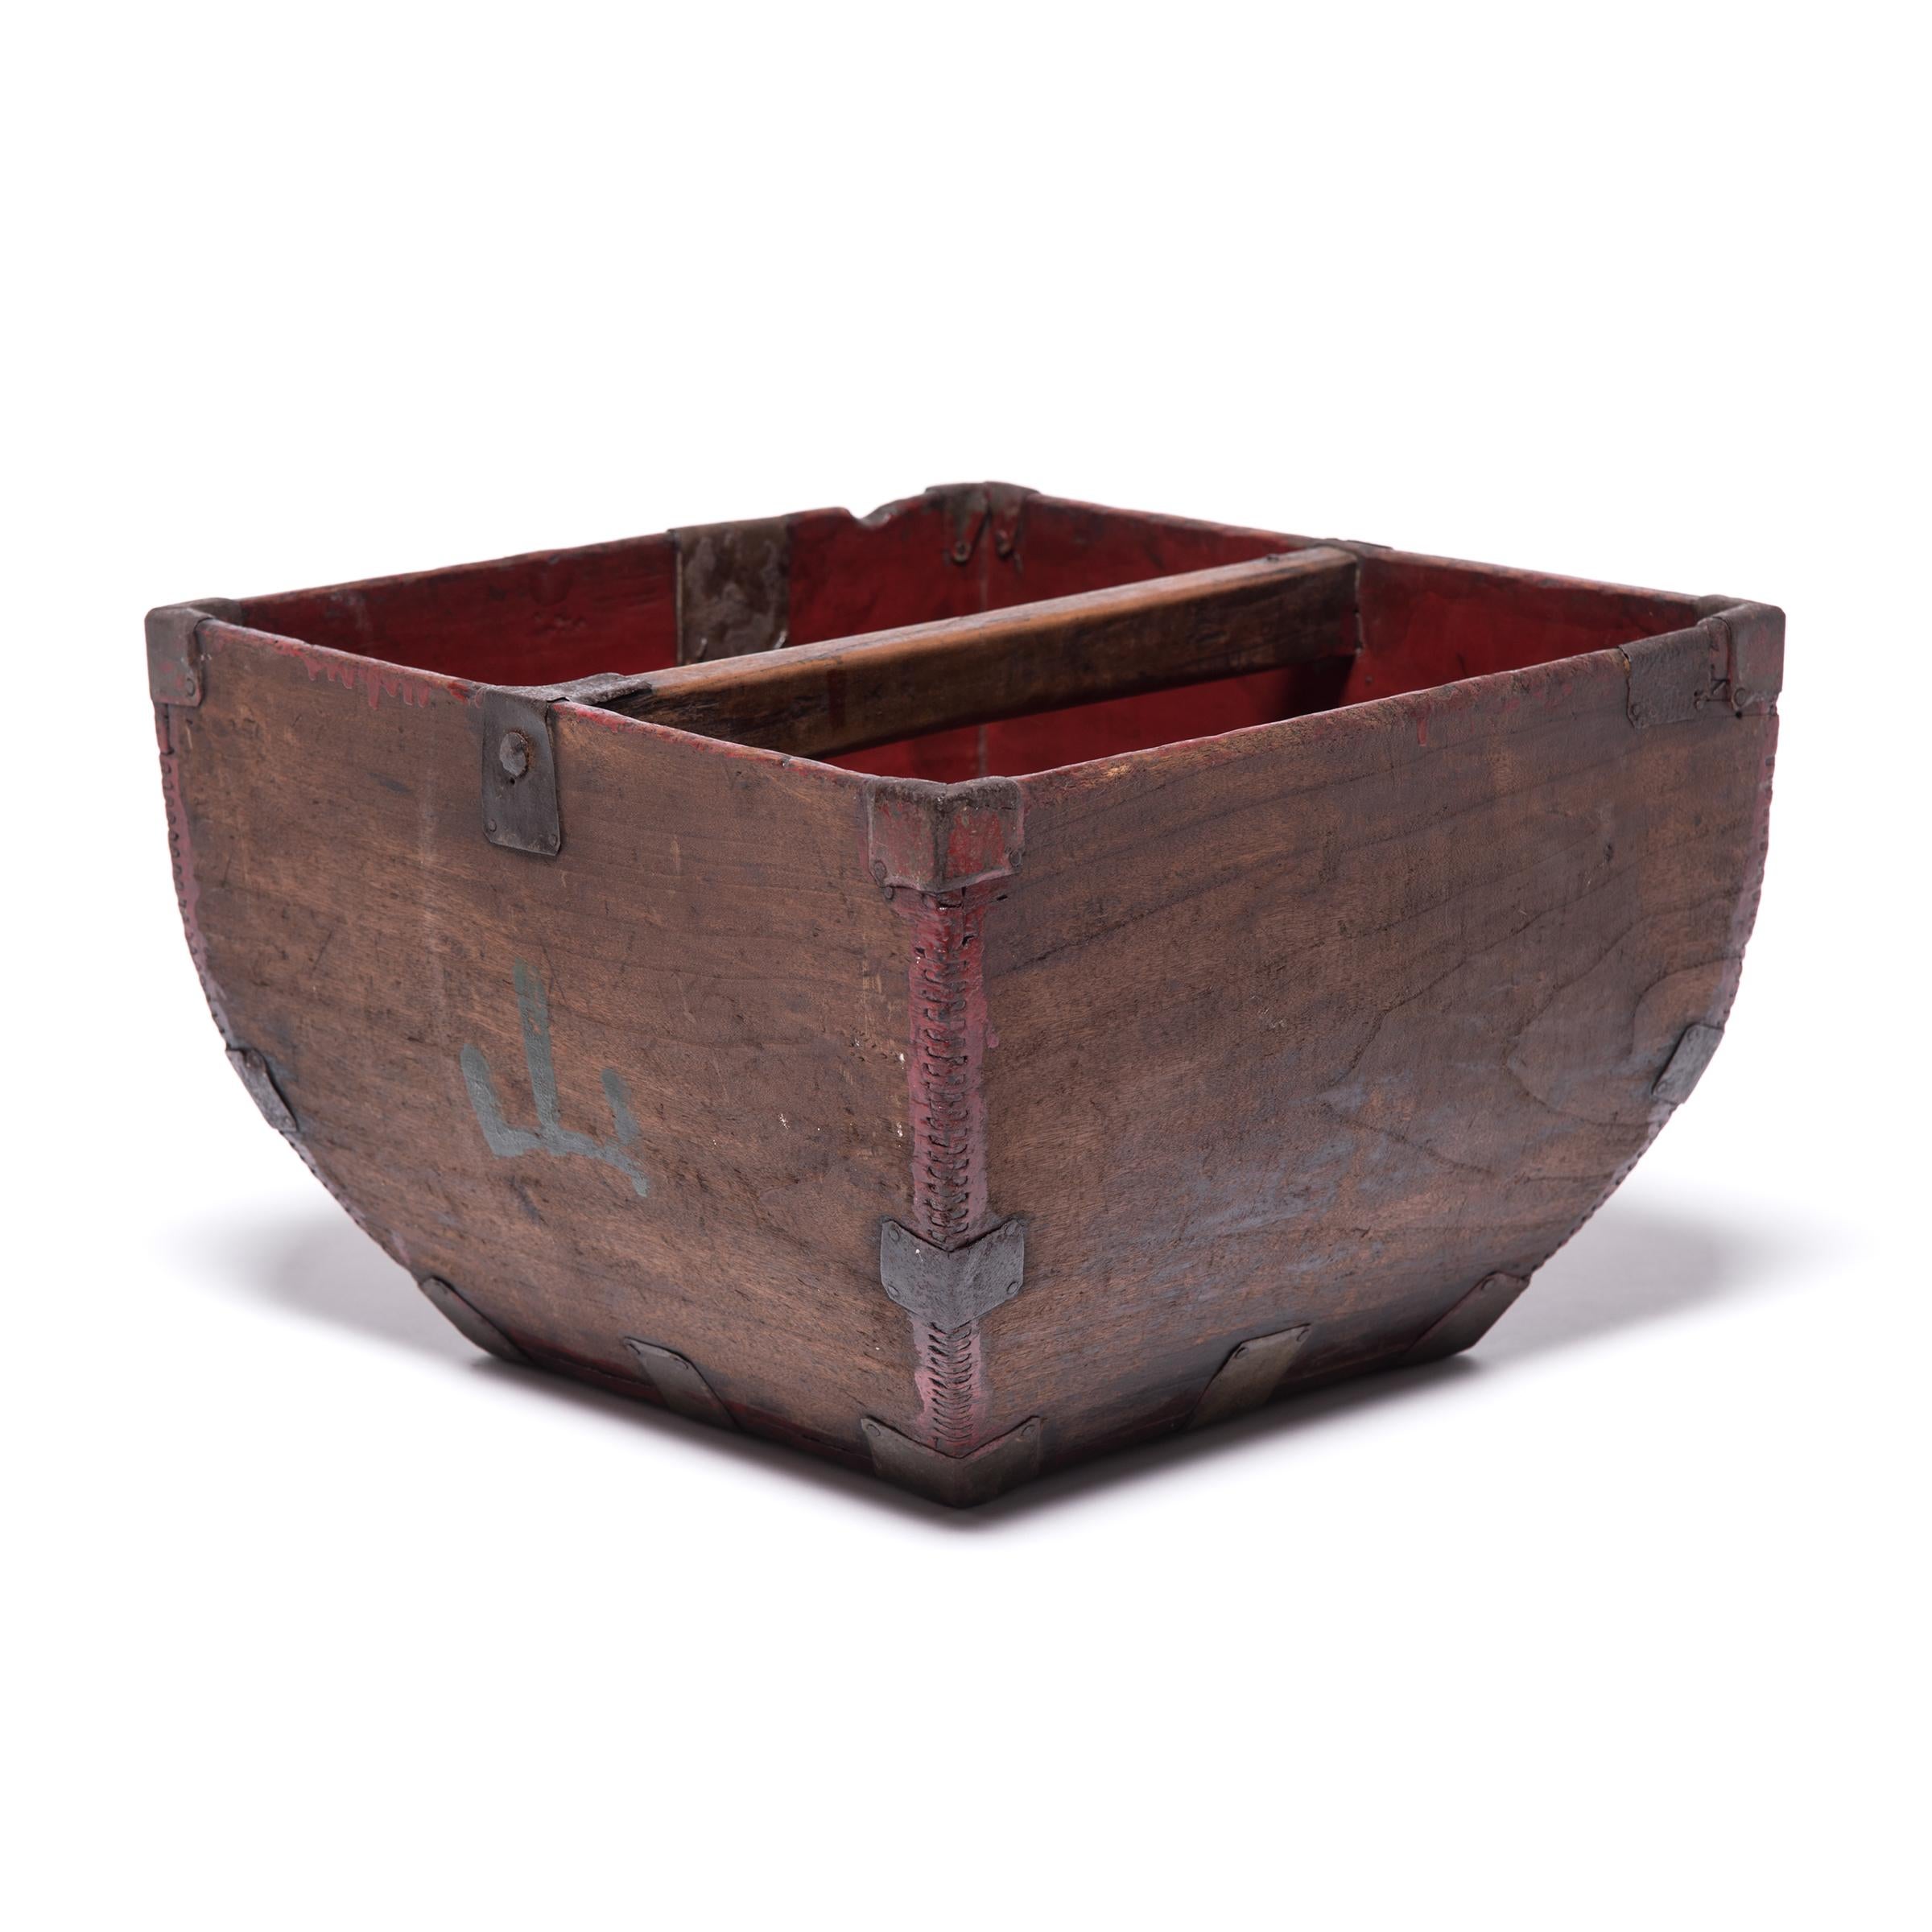 This rustic container was made over a hundred years ago to measure and hold a dou of rice, an ancient Chinese measurement. Handcrafted with dovetail joints, the vessel has gracefully swelling sides and an arched handle, burnished from years of use.